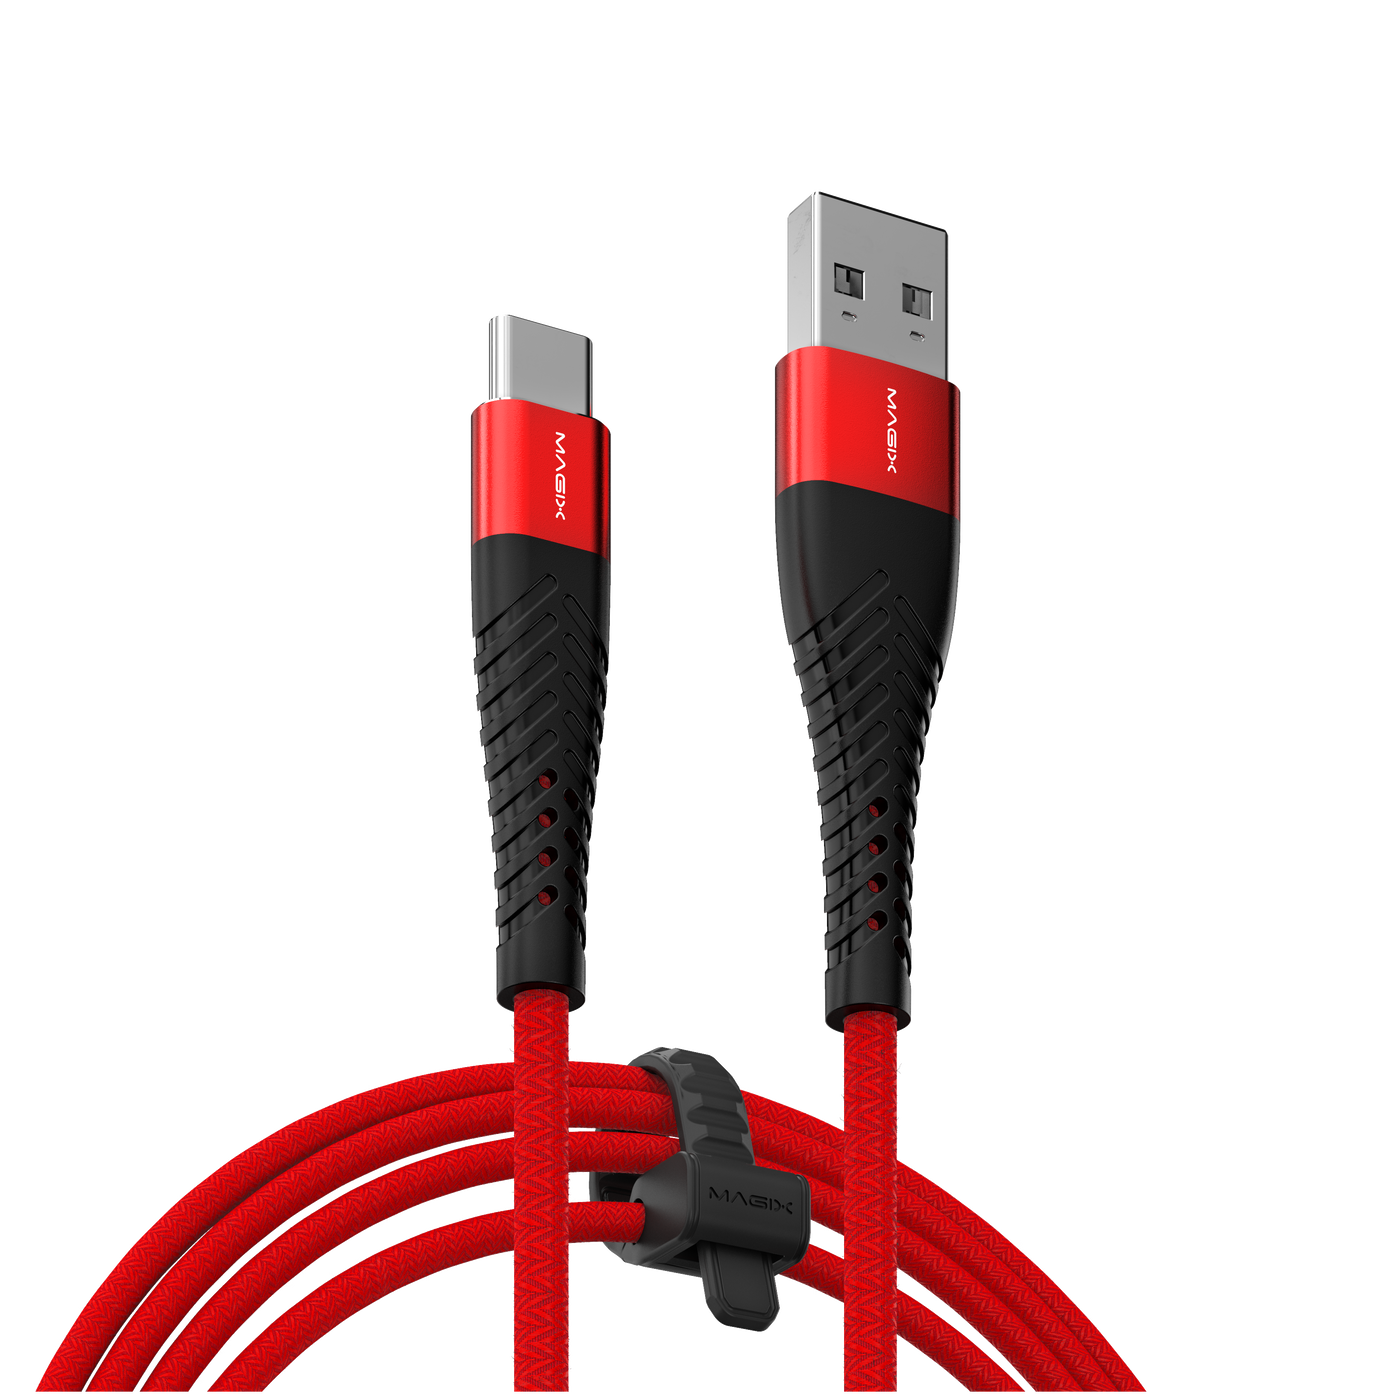 MAGIX 18W USB C Charging Cable 3A , Quick Charge QC 3.0 (RED)